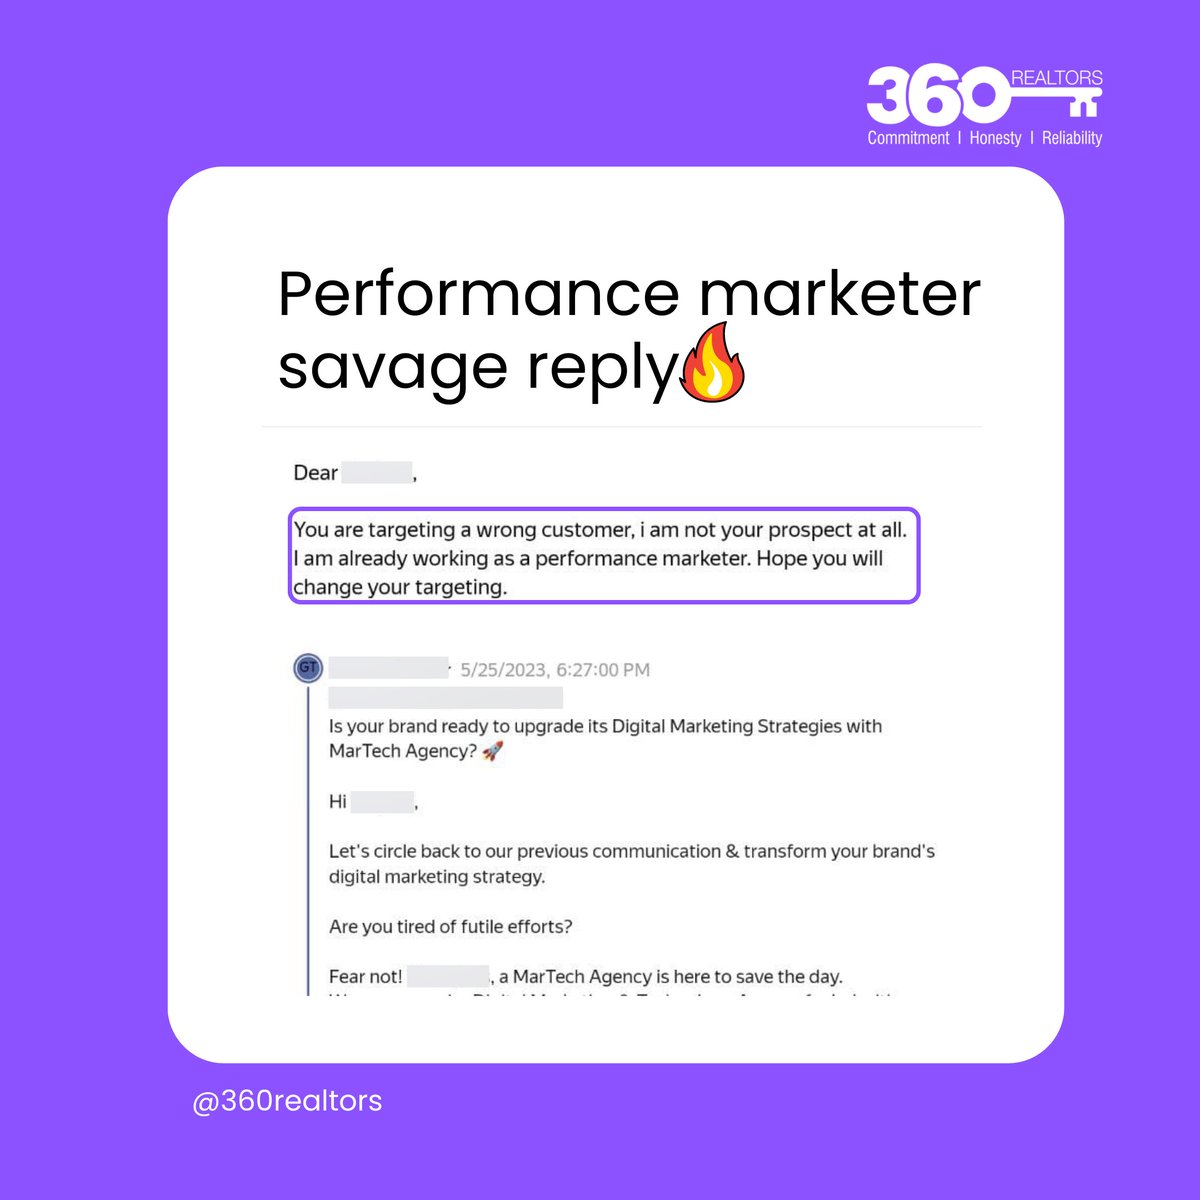 When an ad agency & performance marketer have a moment over the mail.

.
What would the conversation be like?

#performancemarketer #jointheconversation #realestate #consultants #realtors #talkitout #memes #marketing